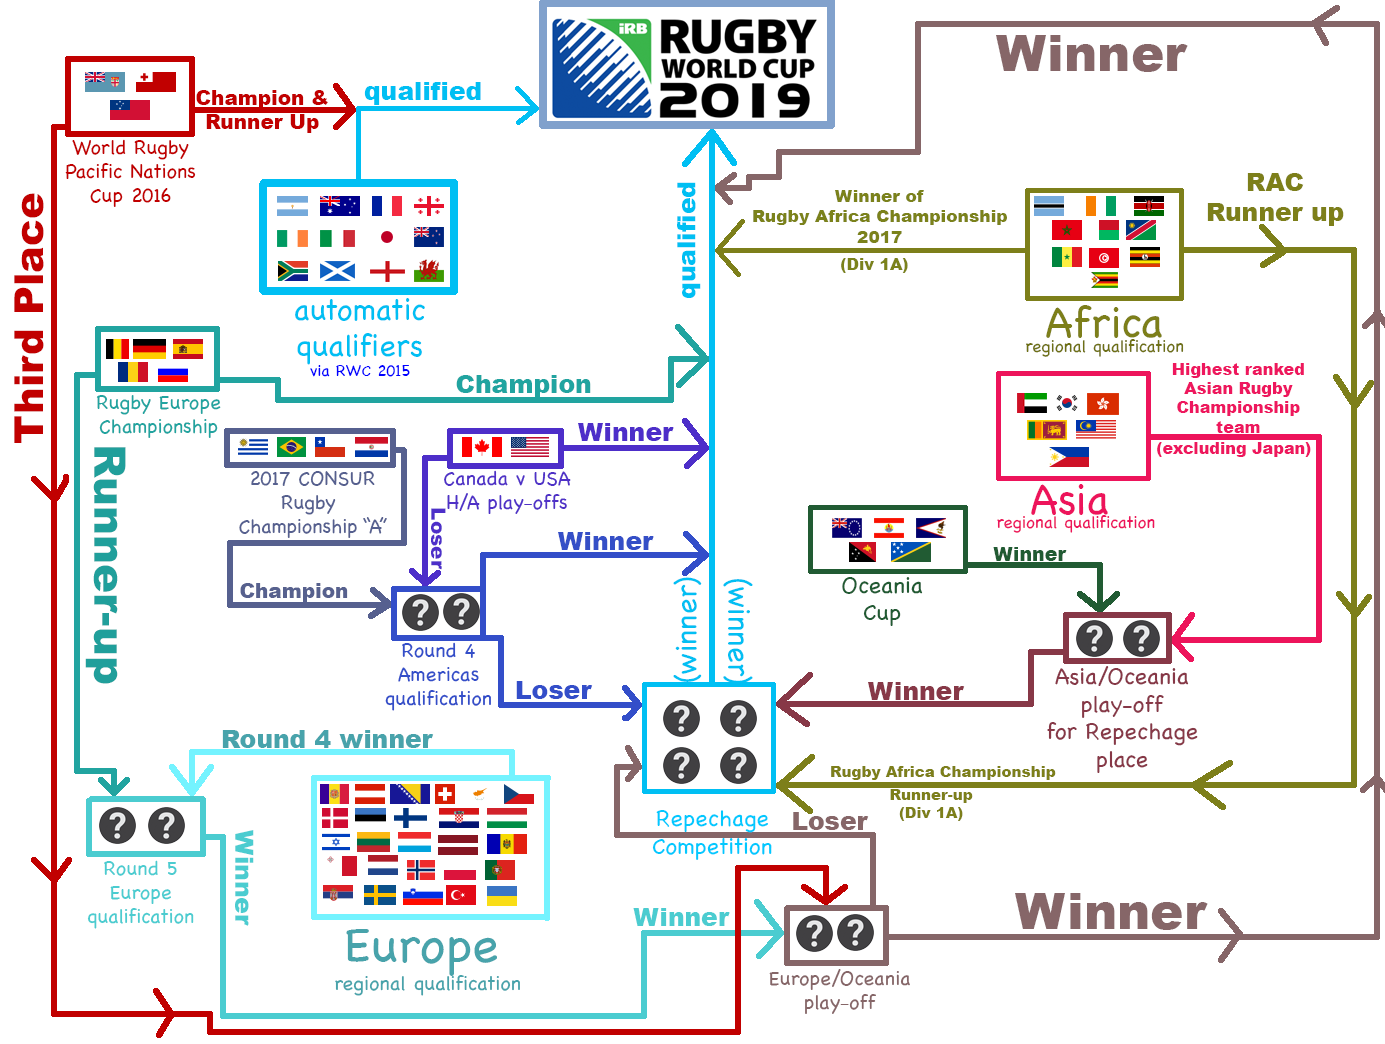 Rugby_World_Cup_2019_Qualification_illustrated.png